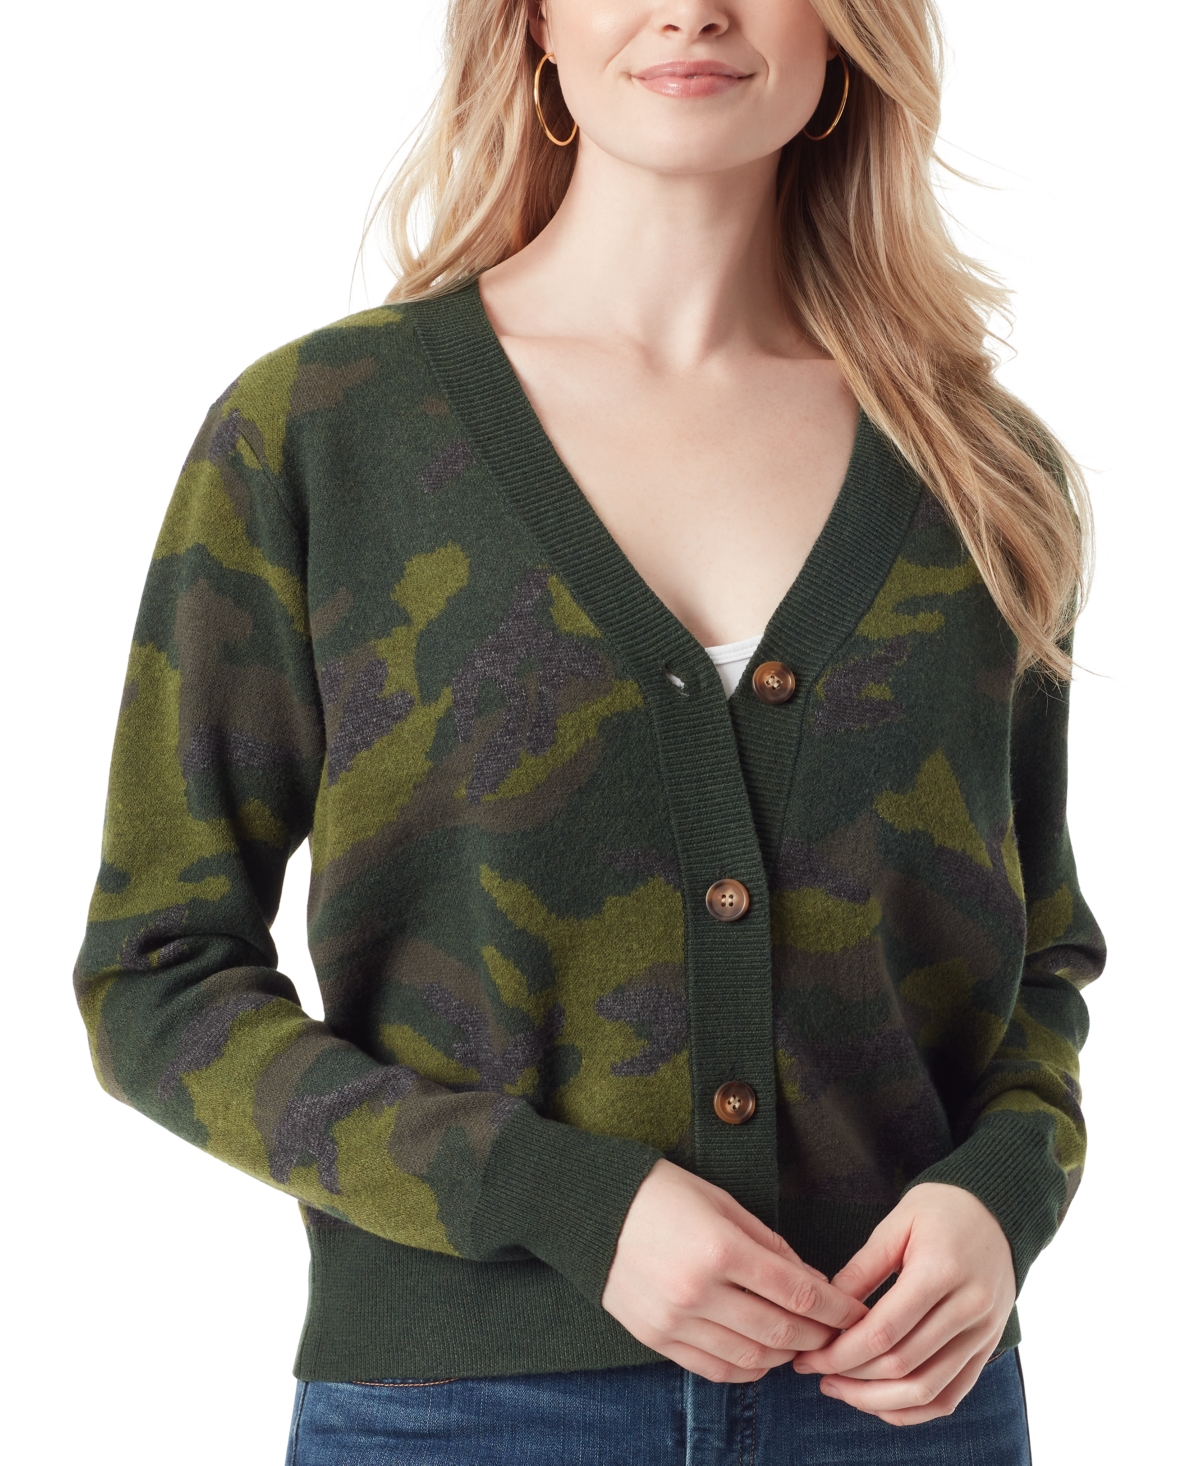 Jessica Simpson Women's Buffalo Plaid Jacquard Button-front Cardigan Sweater In Olive Night-foragers Camouflage